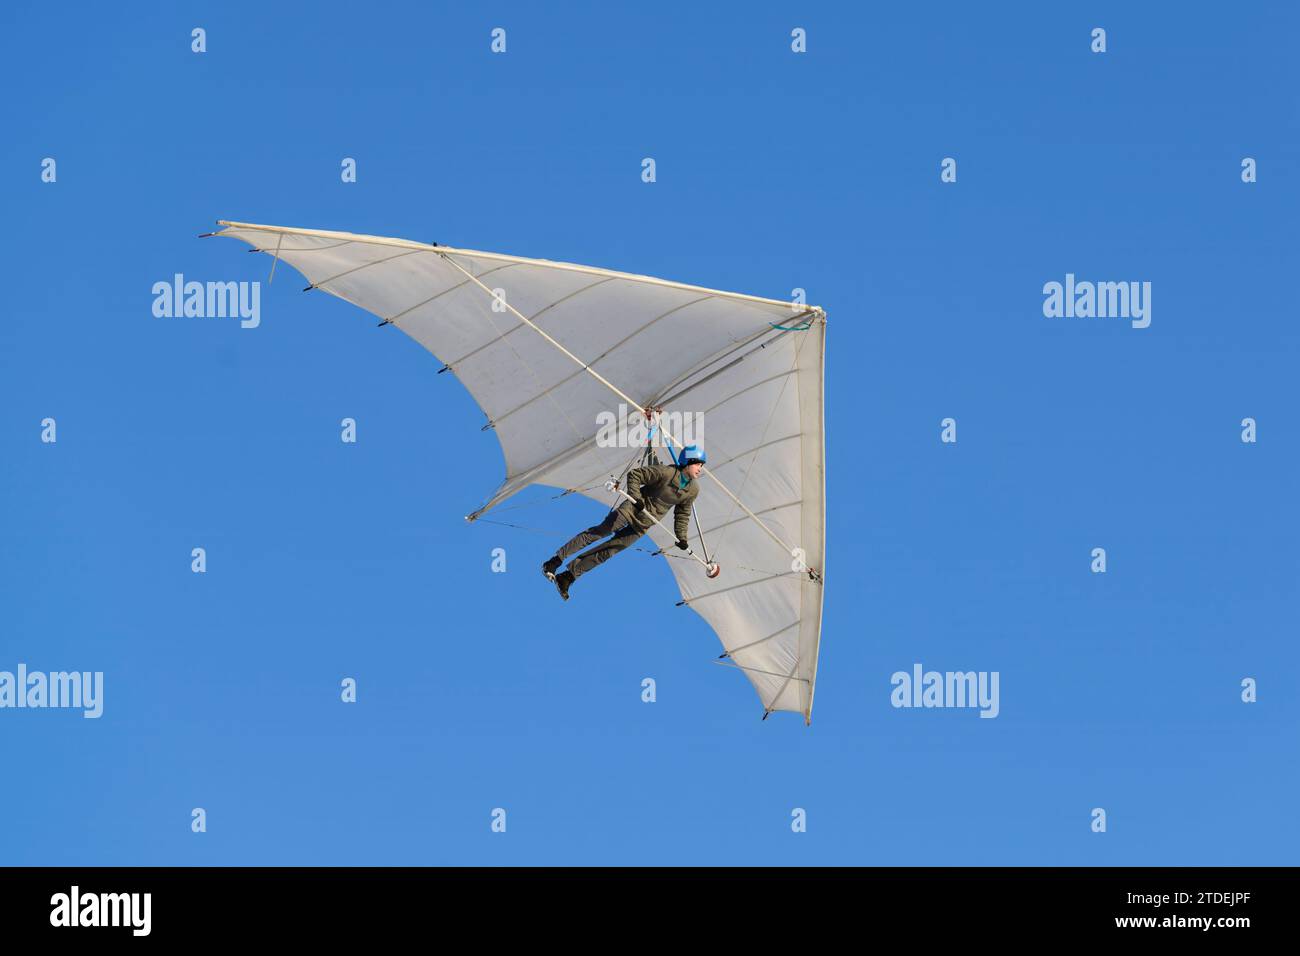 Old vintage hang glider paraglider kite. Learning to fly. Dream of flying. Modern Icarus. Stock Photo